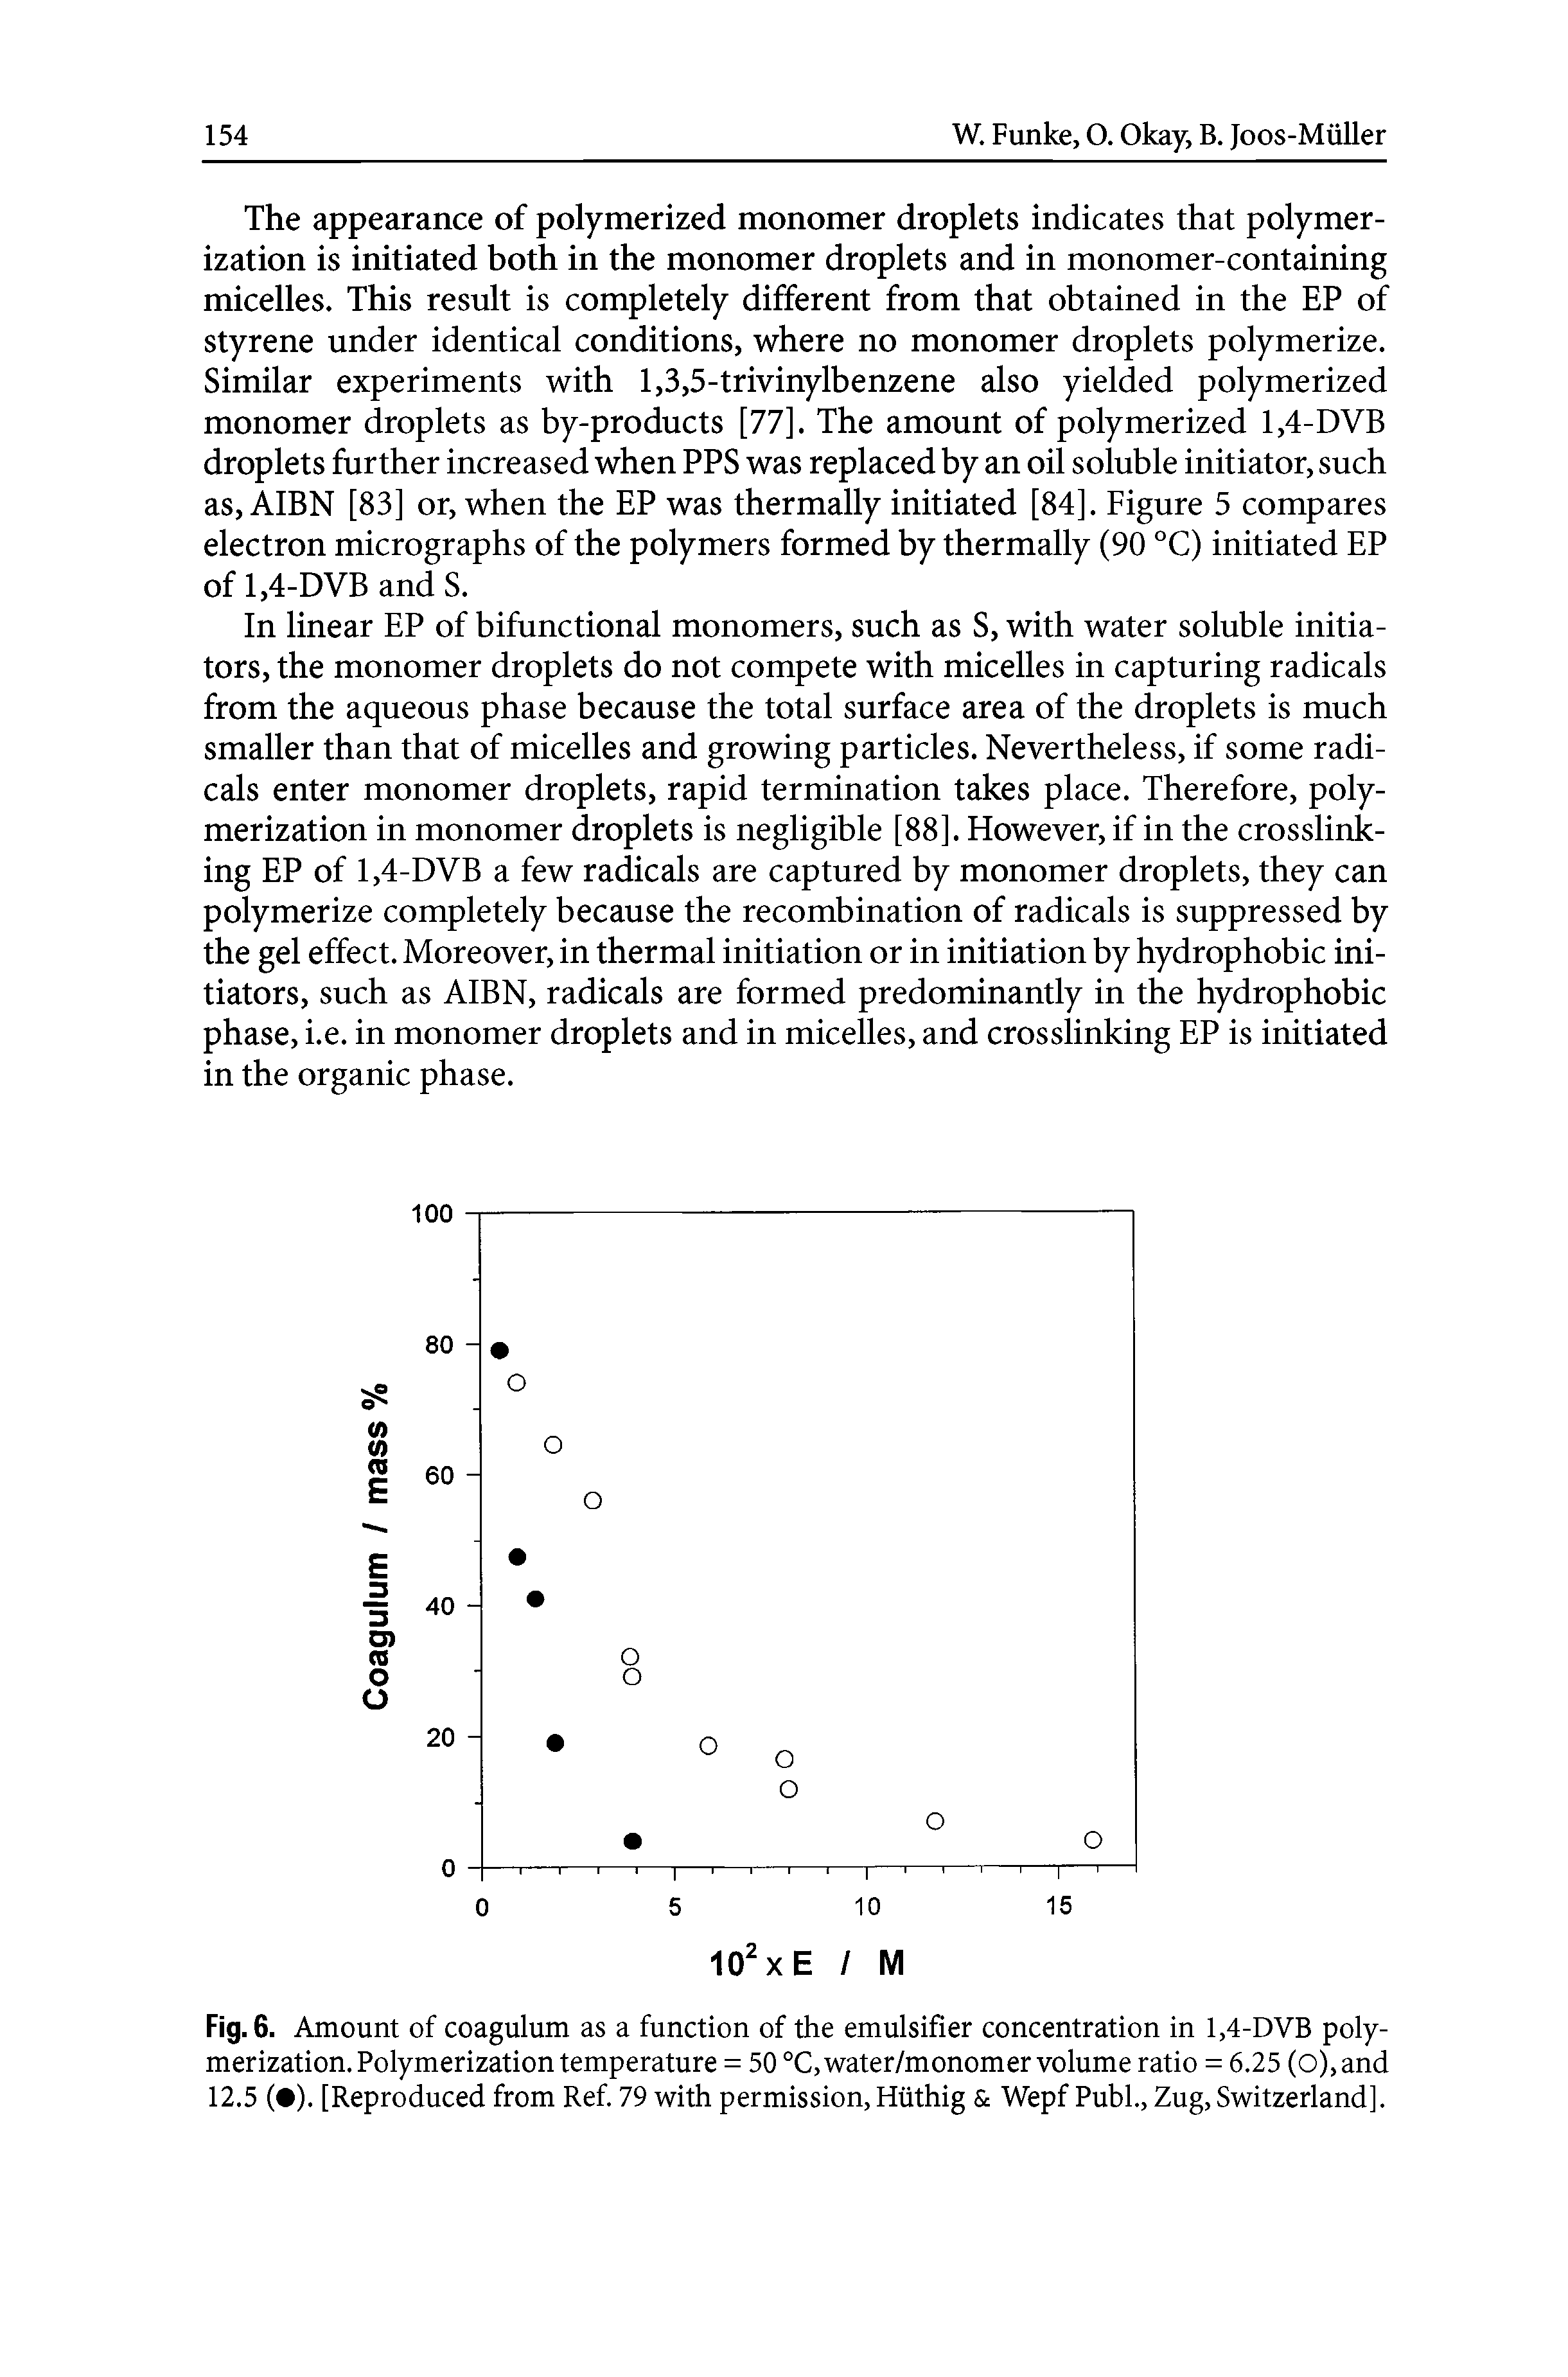 Fig. 6. Amount of coagulum as a function of the emulsifier concentration in 1,4-DVB polymerization. Polymerization temperature = 50 °C,water/monomer volume ratio = 6.25 (0),and 12.5 ( ). [Reproduced from Ref. 79 with permission, Hiithig Wepf Publ., Zug, Switzerland].